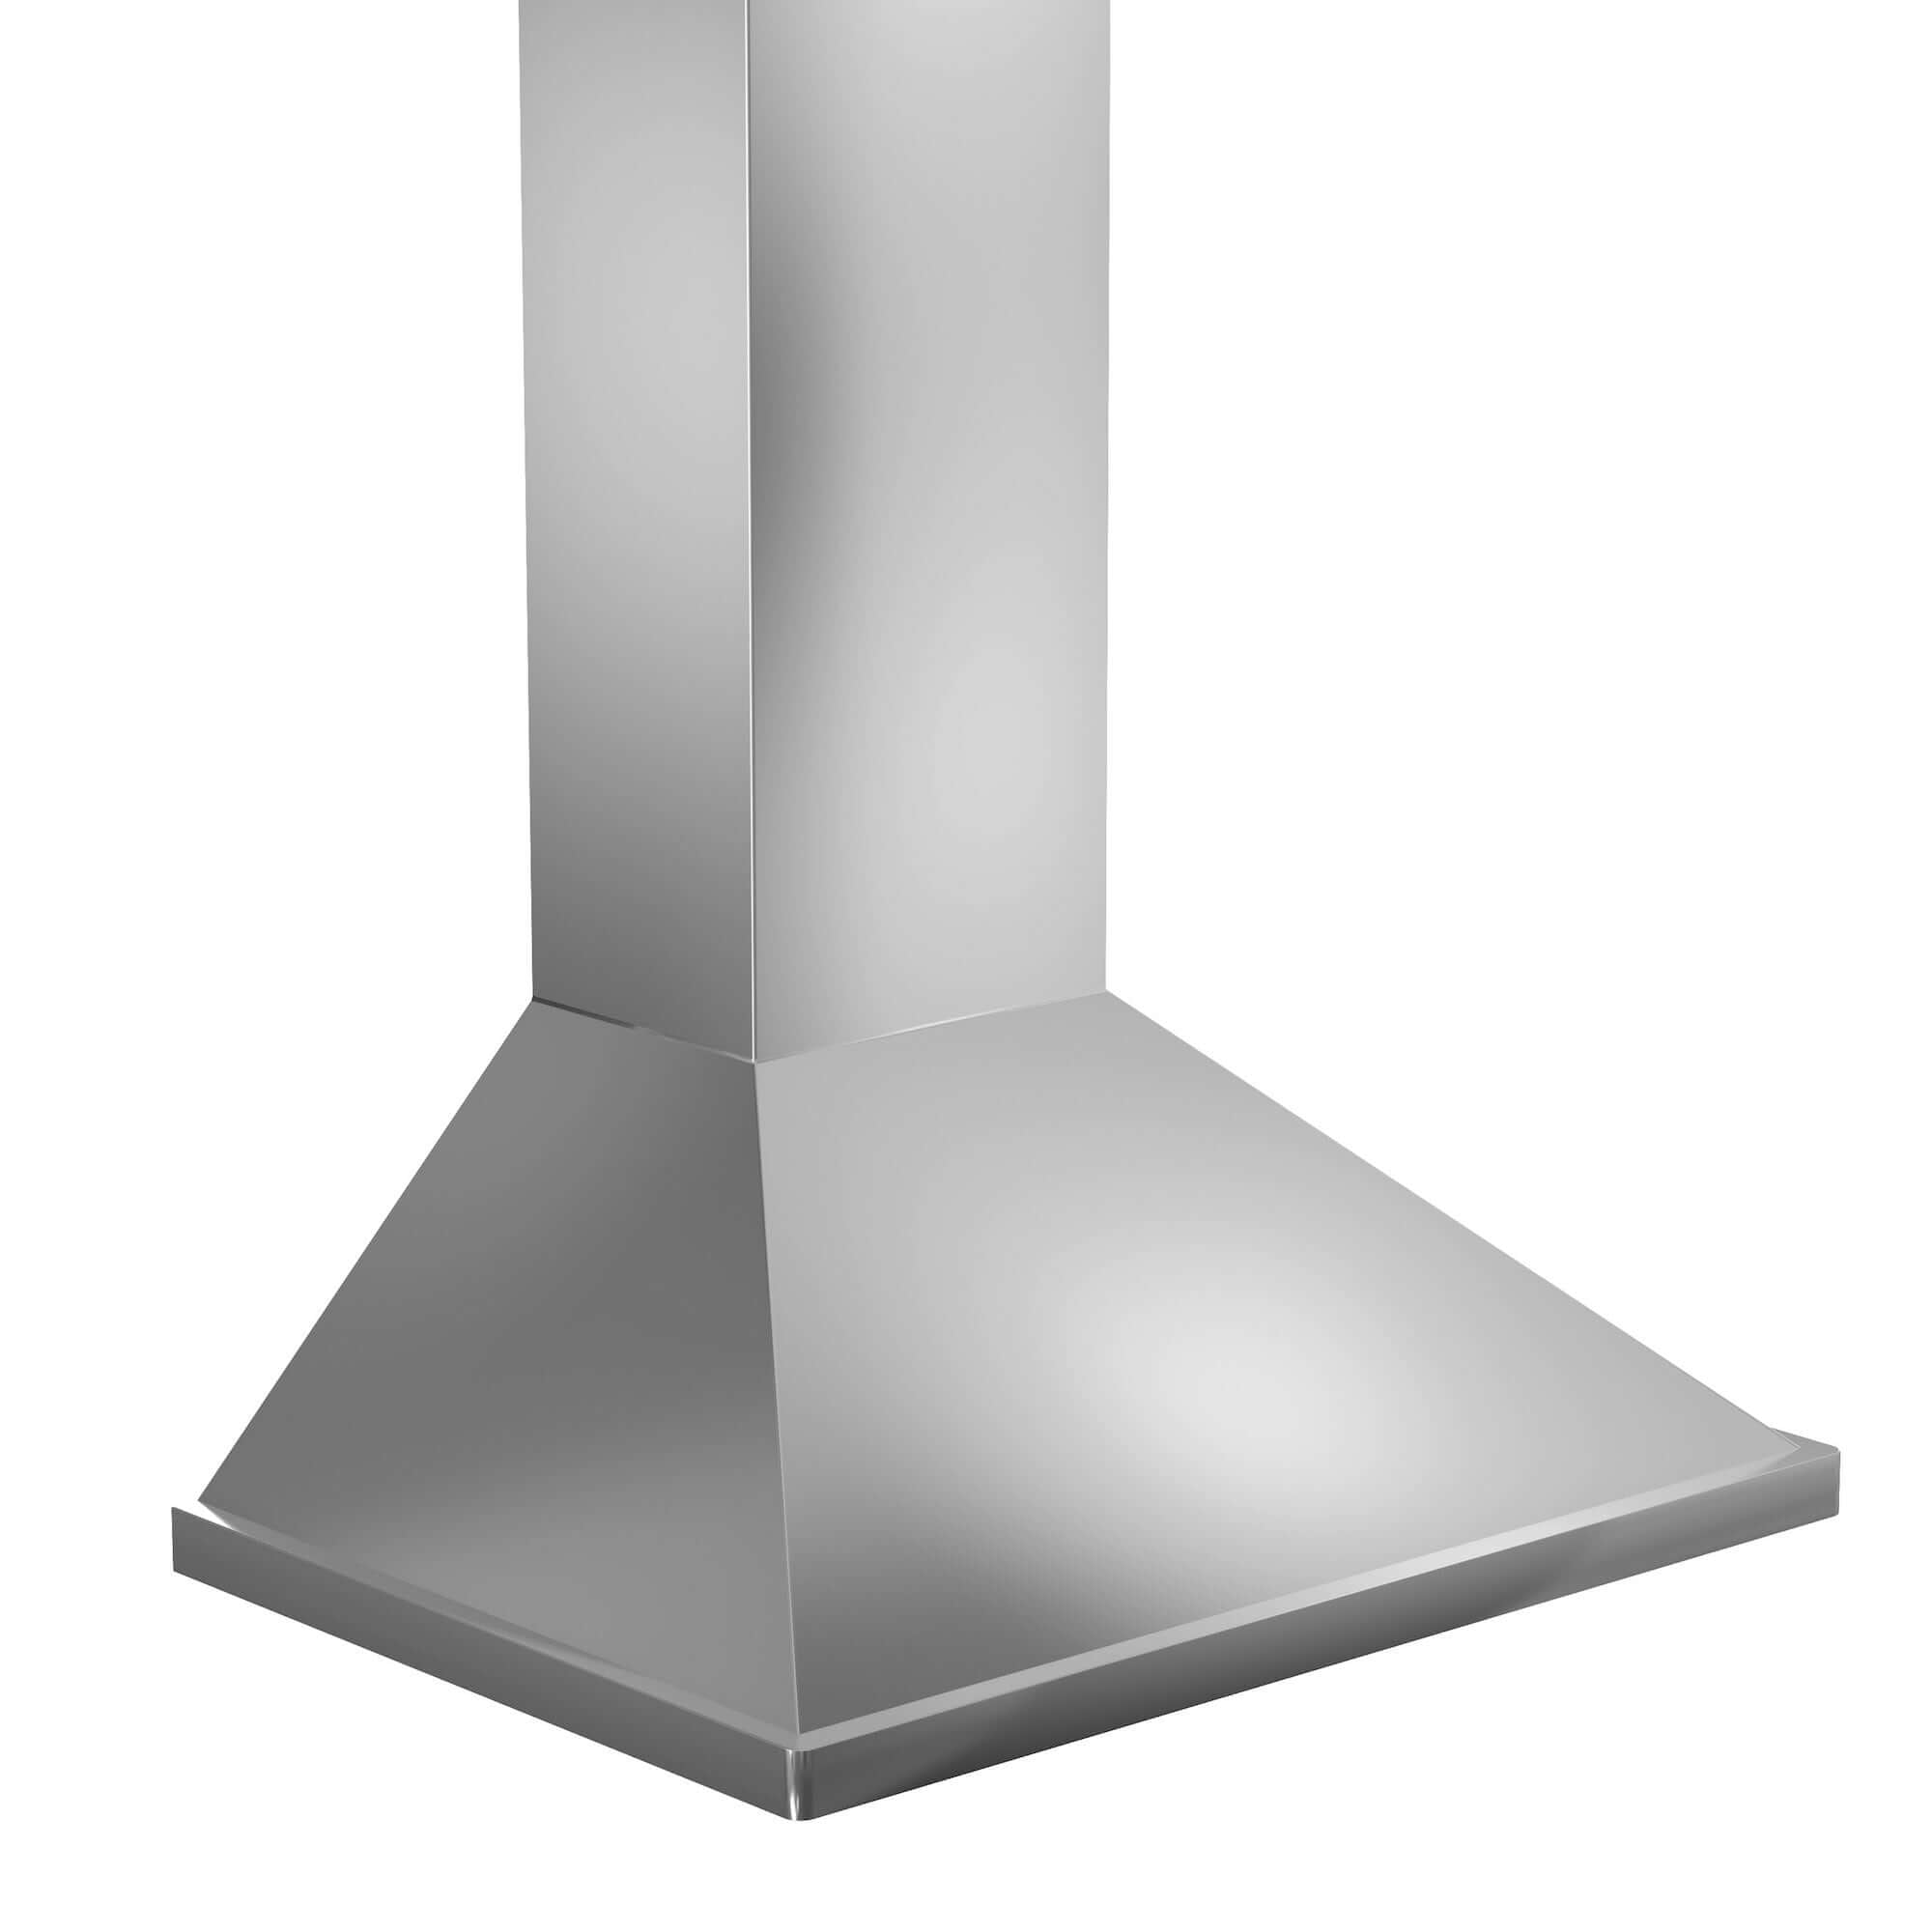 ZLINE 36 in. Convertible Vent Wall Mount Range Hood in Outdoor Approved Stainless Steel (696-304-36)